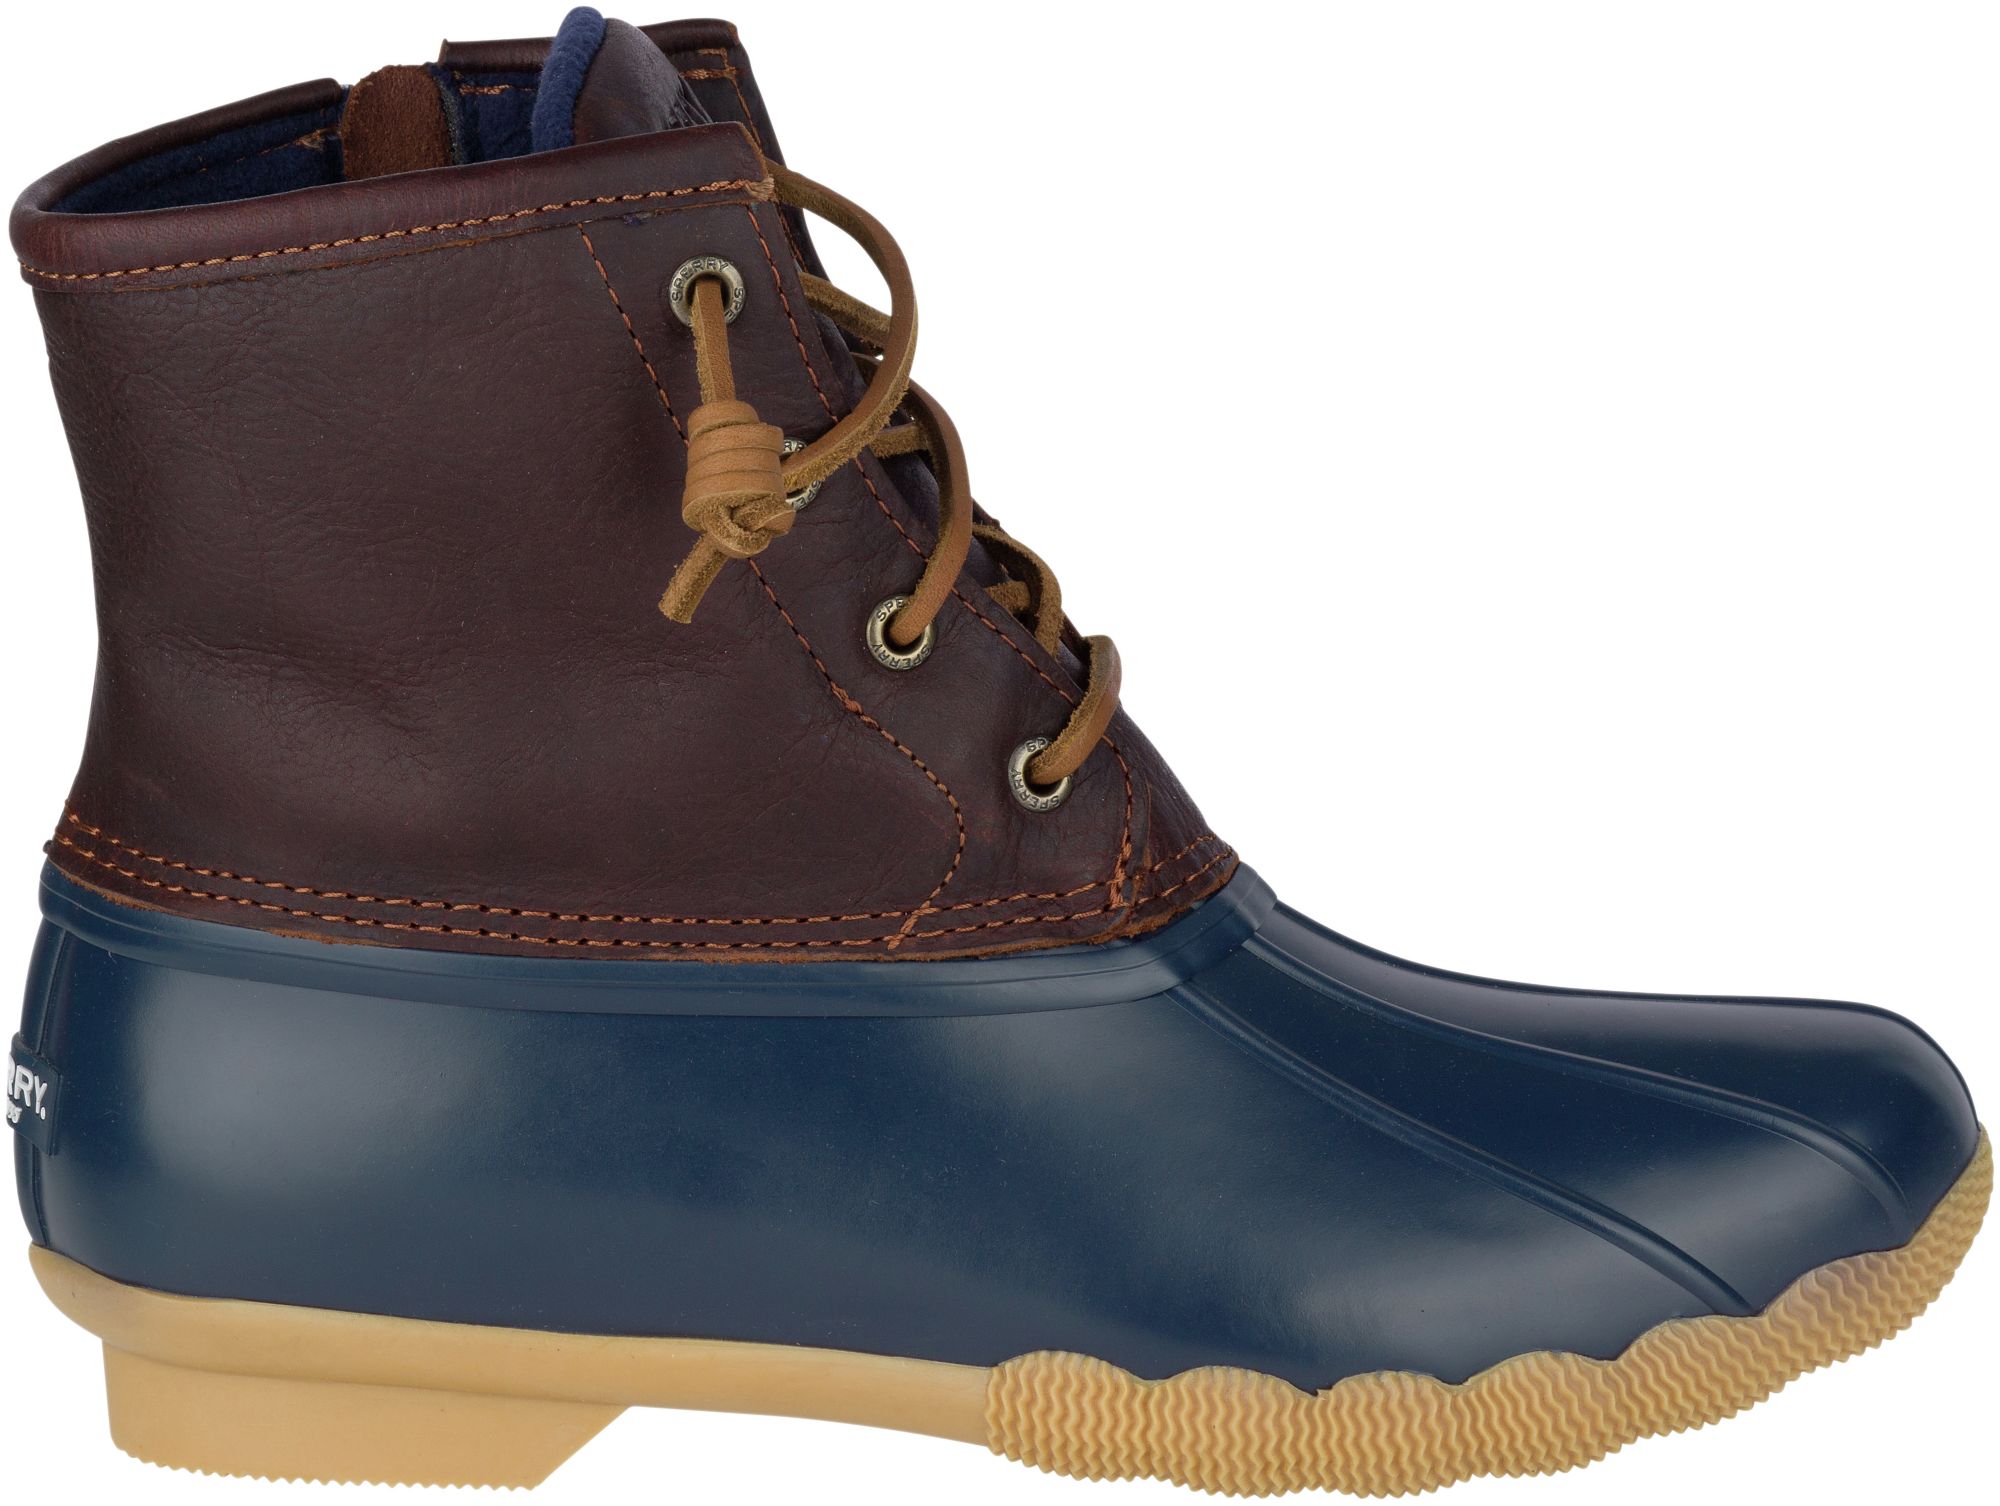 sperry duck boots with buckle